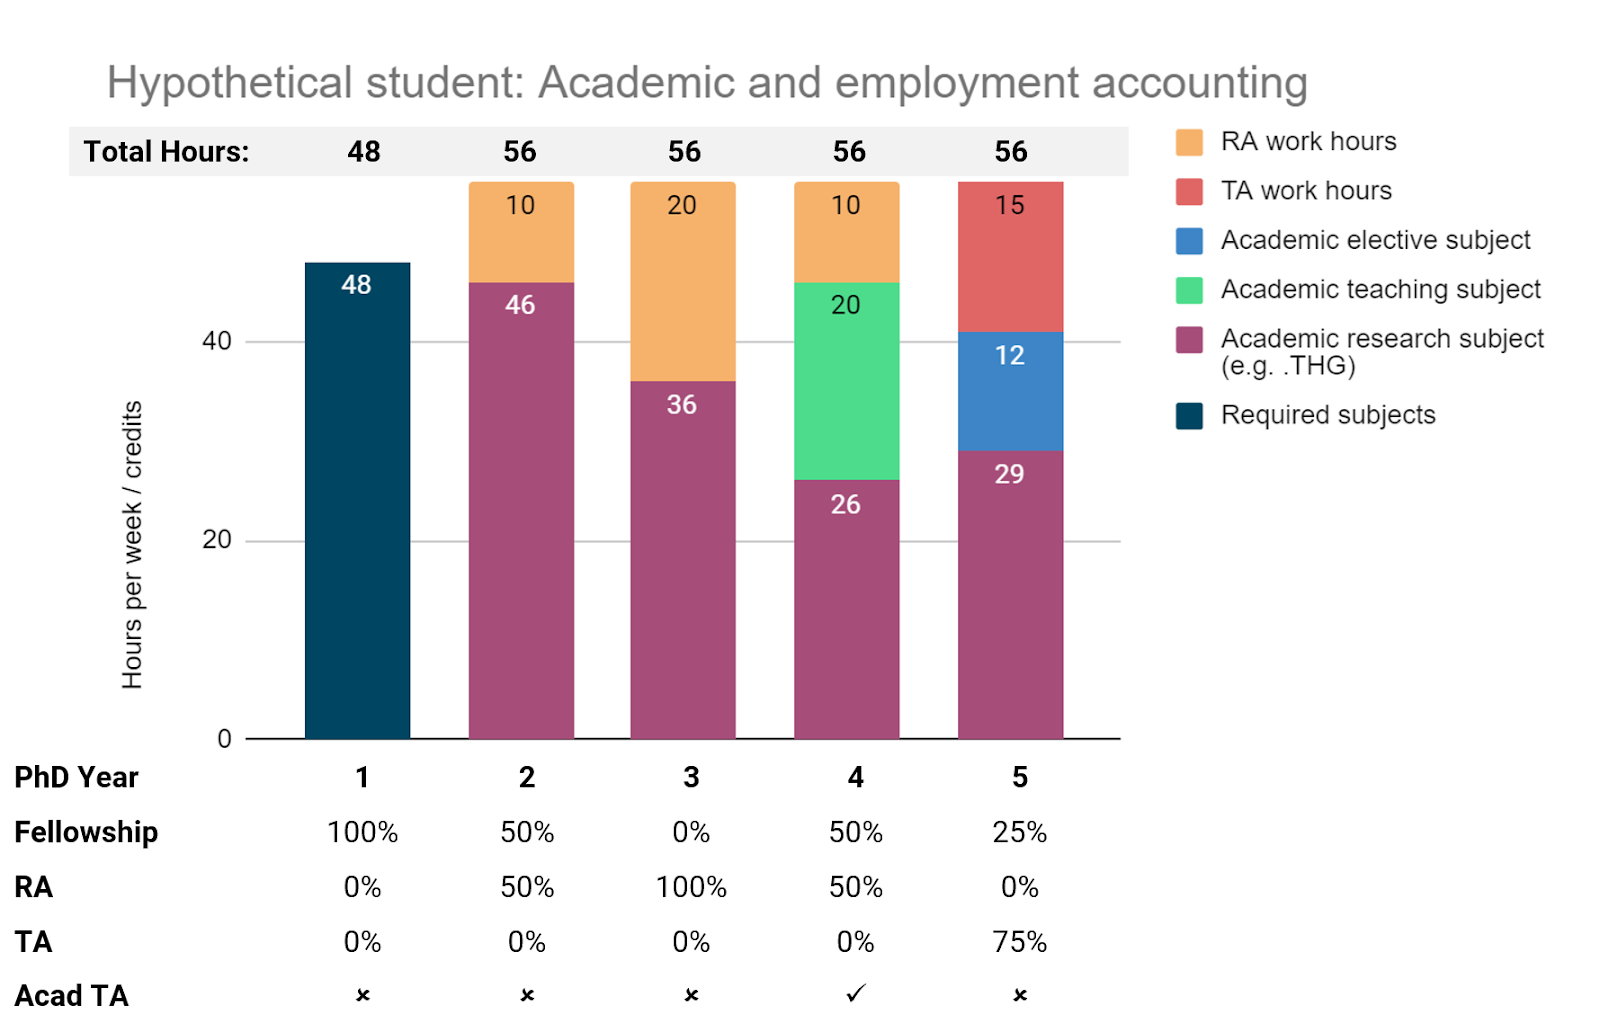 Bar chart representing the hypothetical student's academic and employment accounting, explained above. 